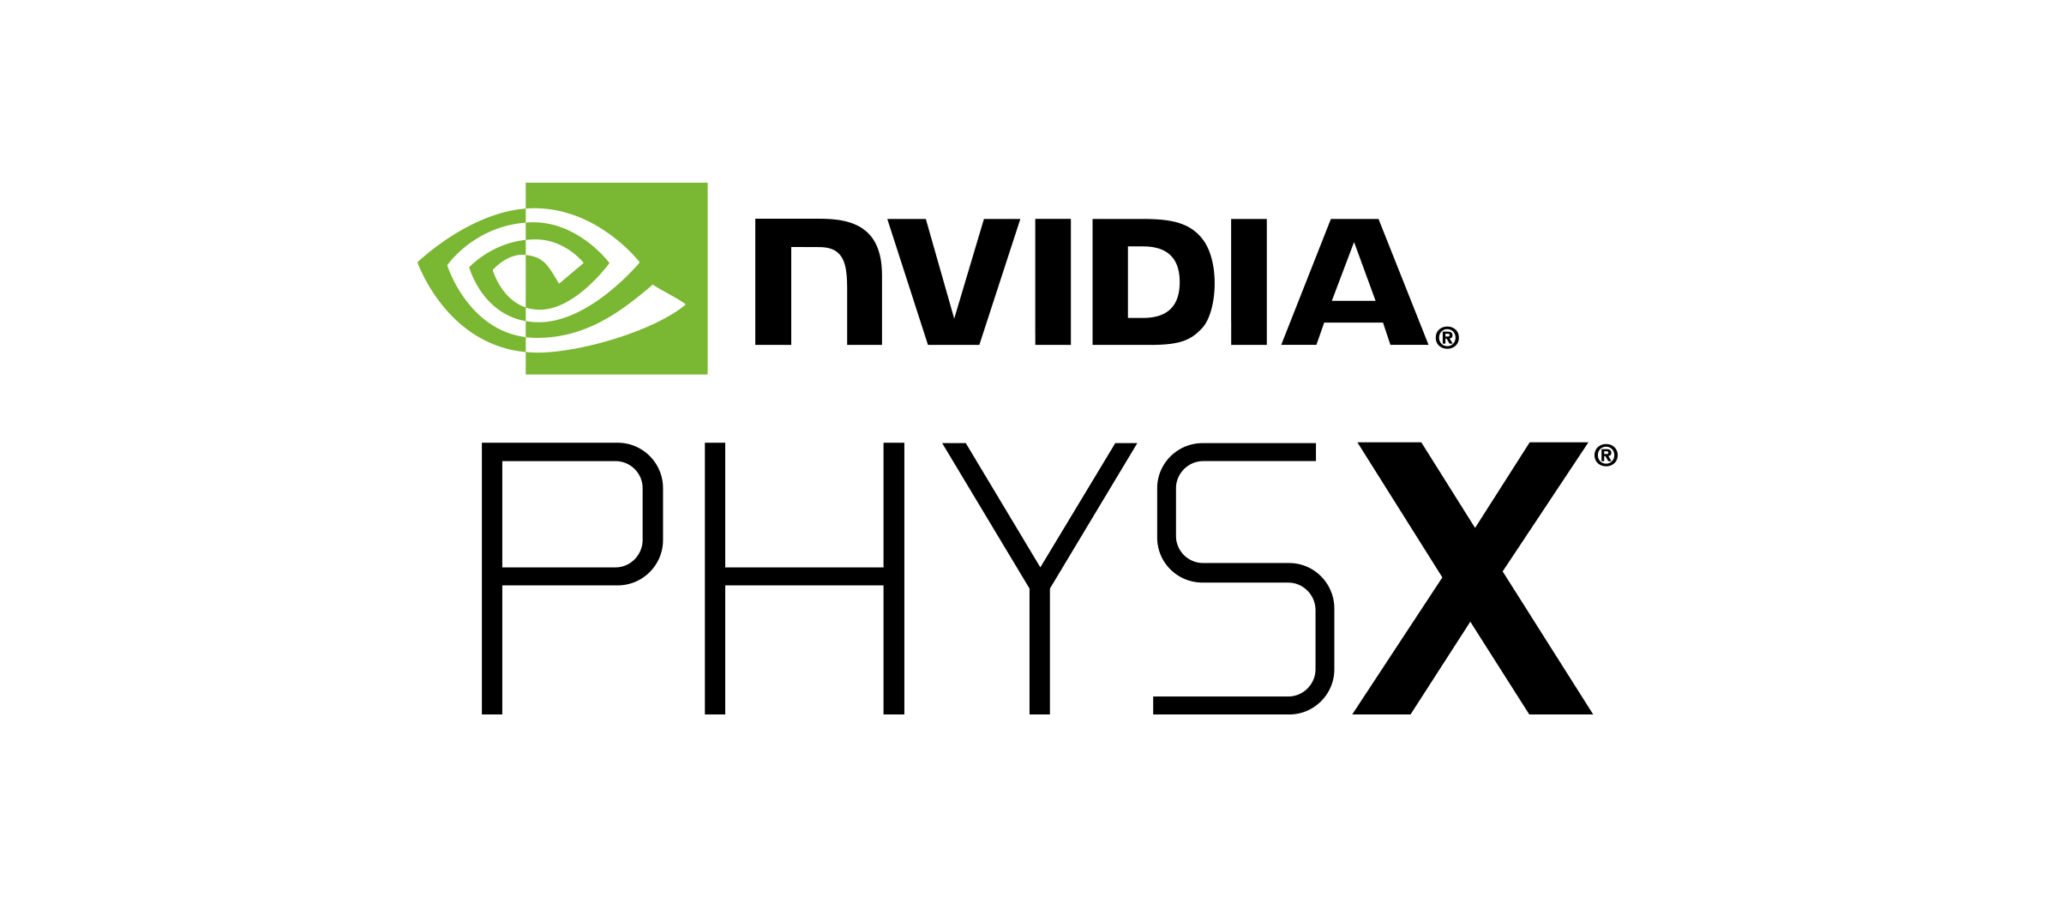 NVIDIA PhysX SDK 4.0 physics engine is now open source